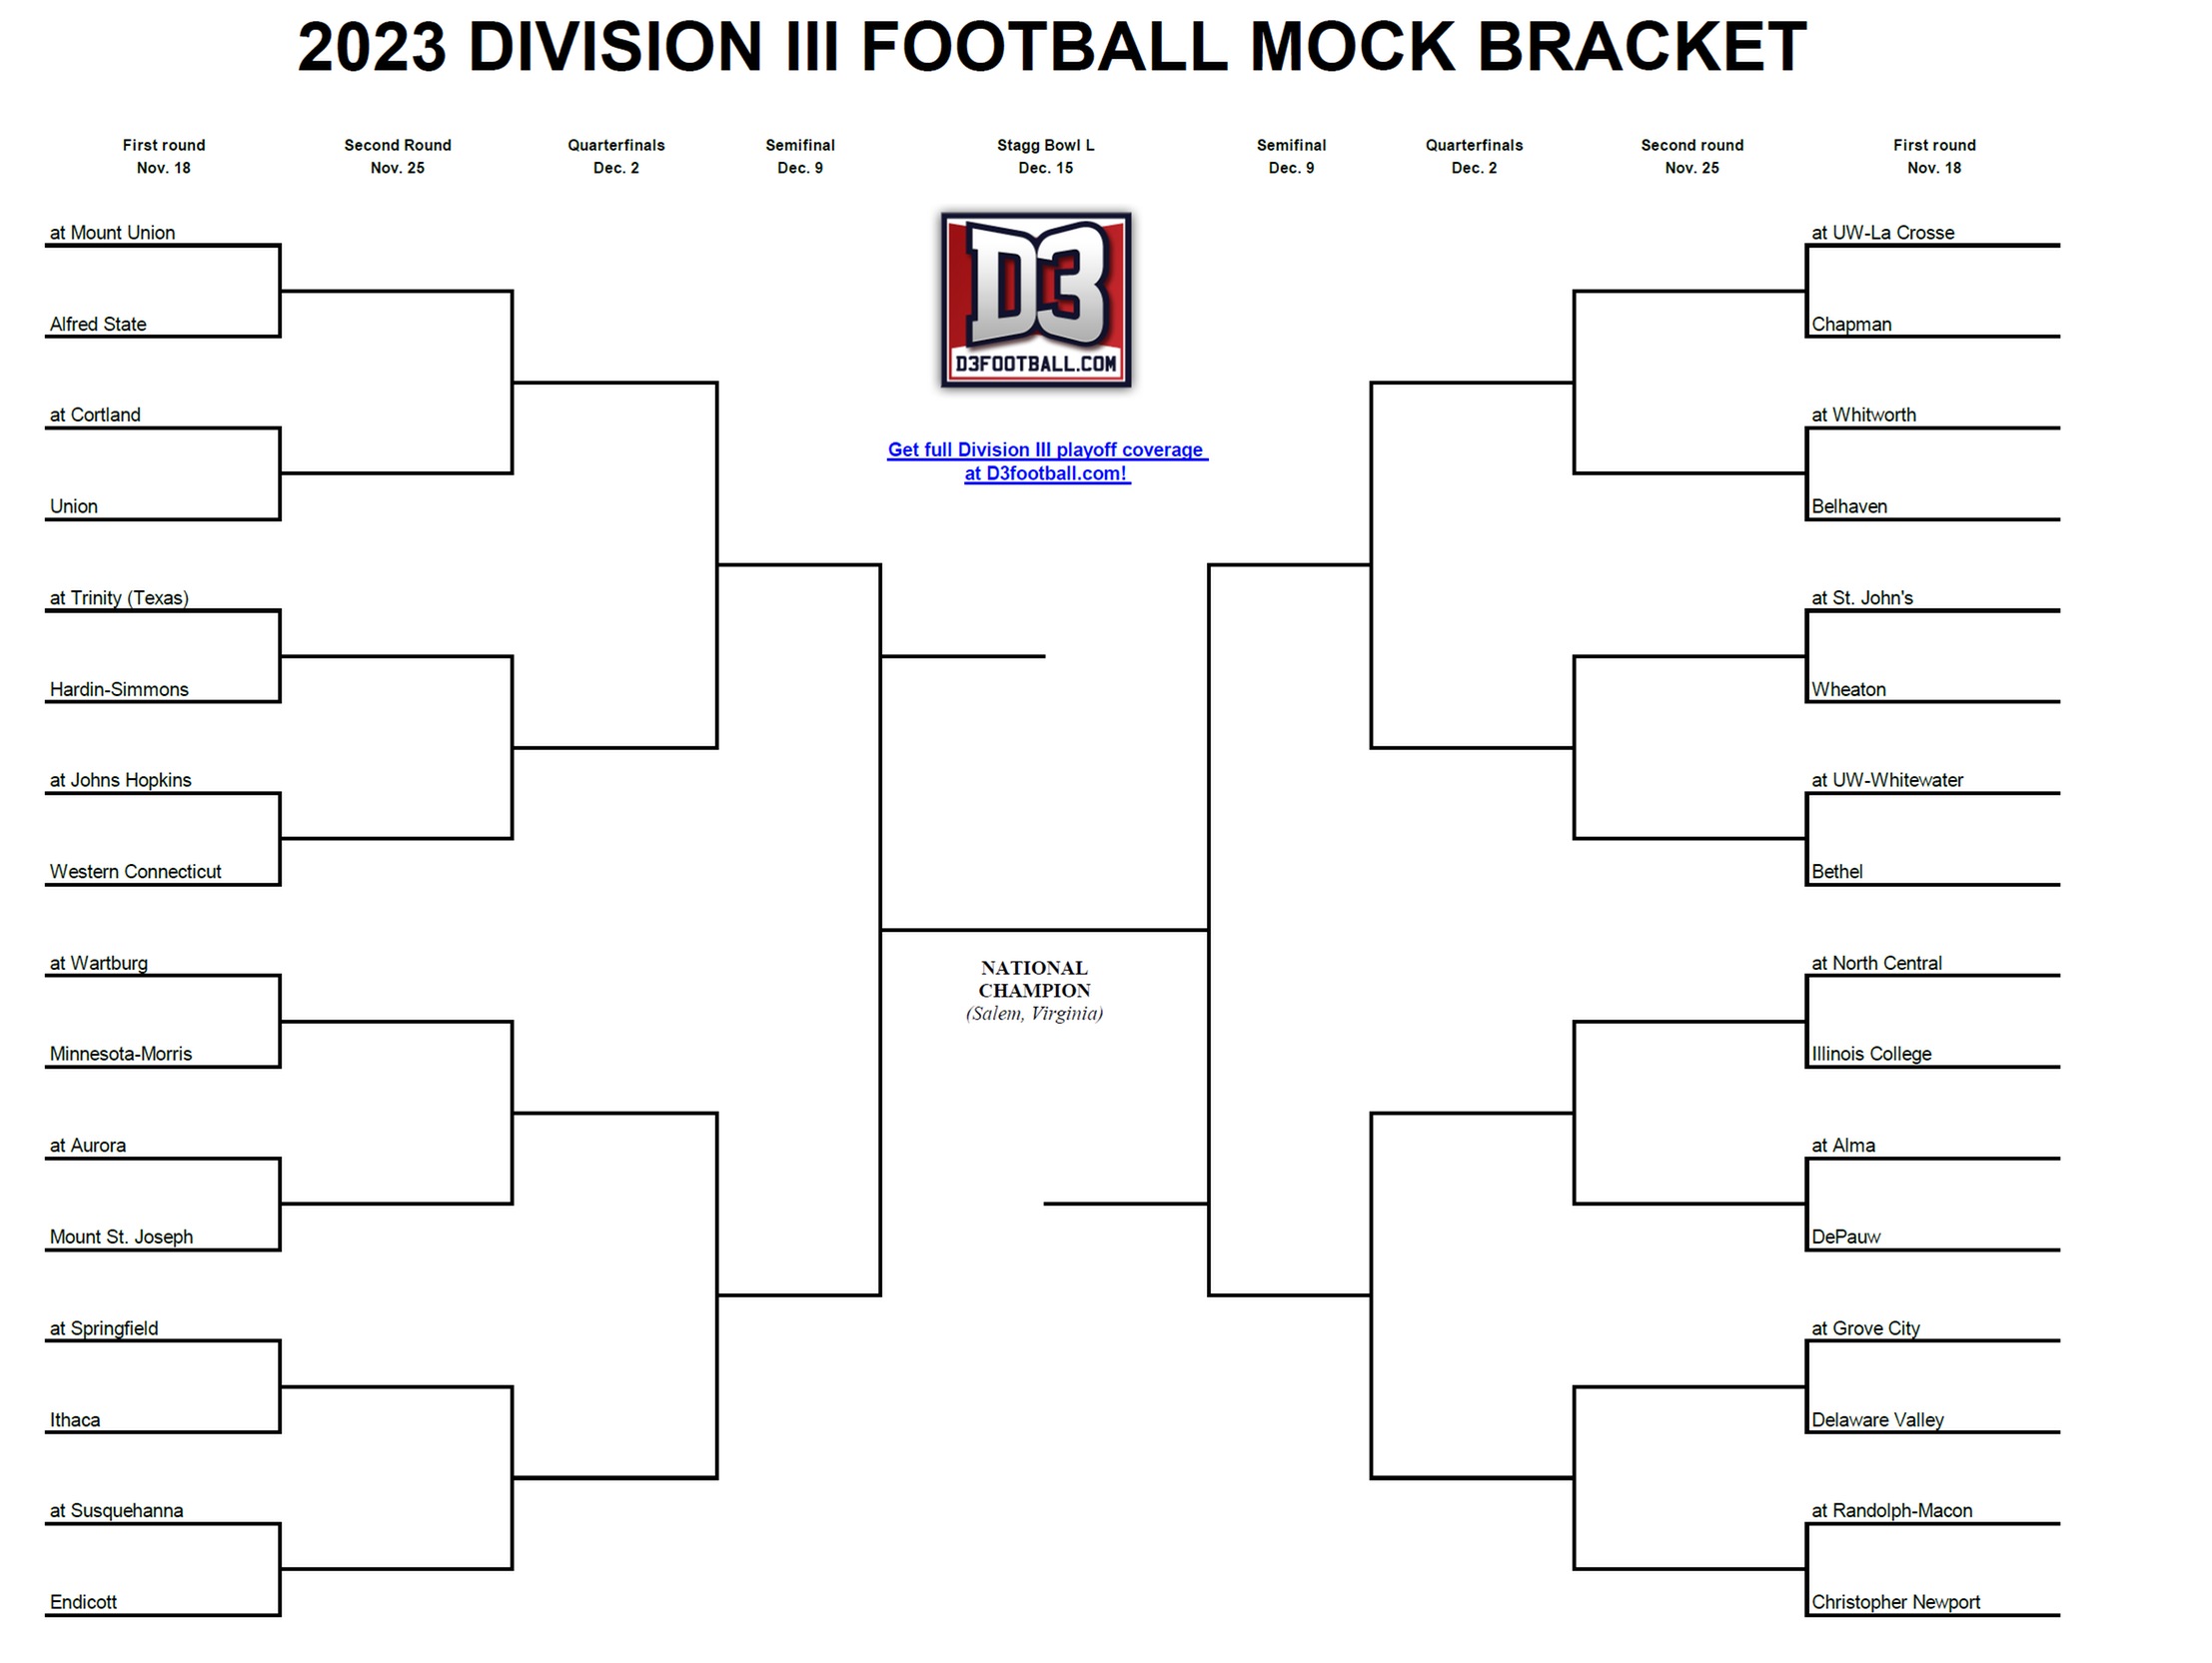 Mock bracket. Please allow images to load.